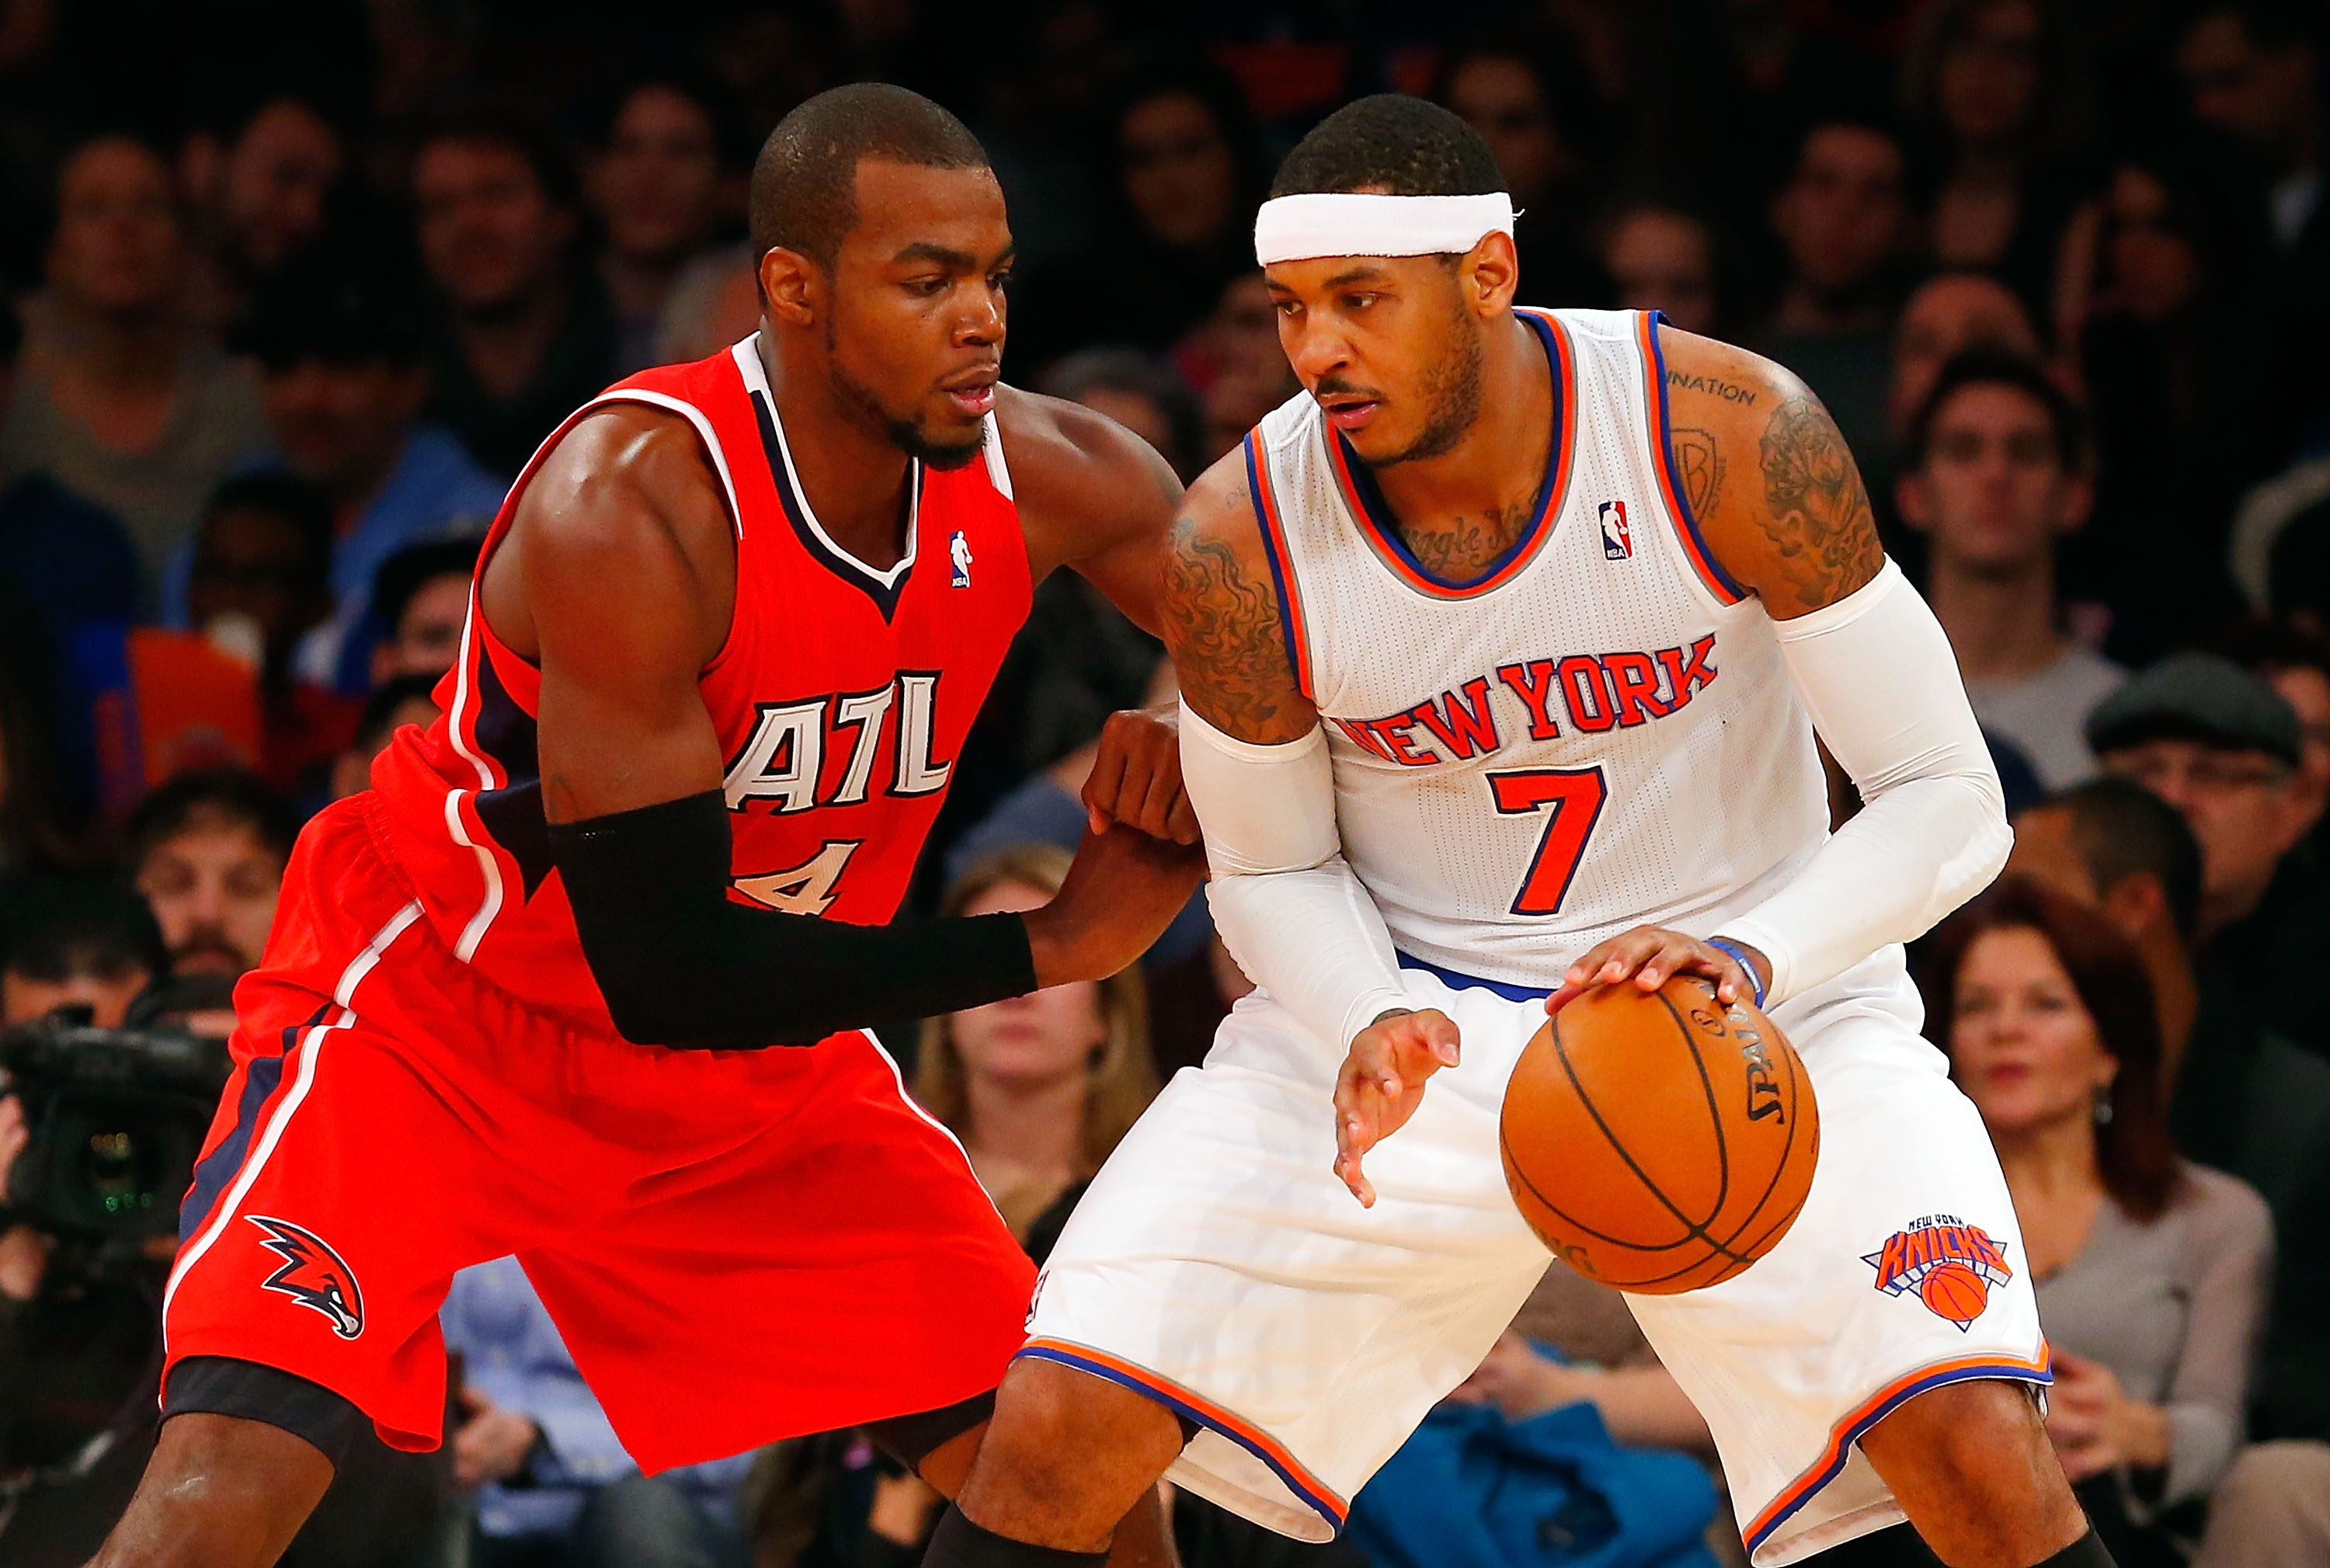 dpa) - US basketball star Carmelo Anthony dribbles with the ball